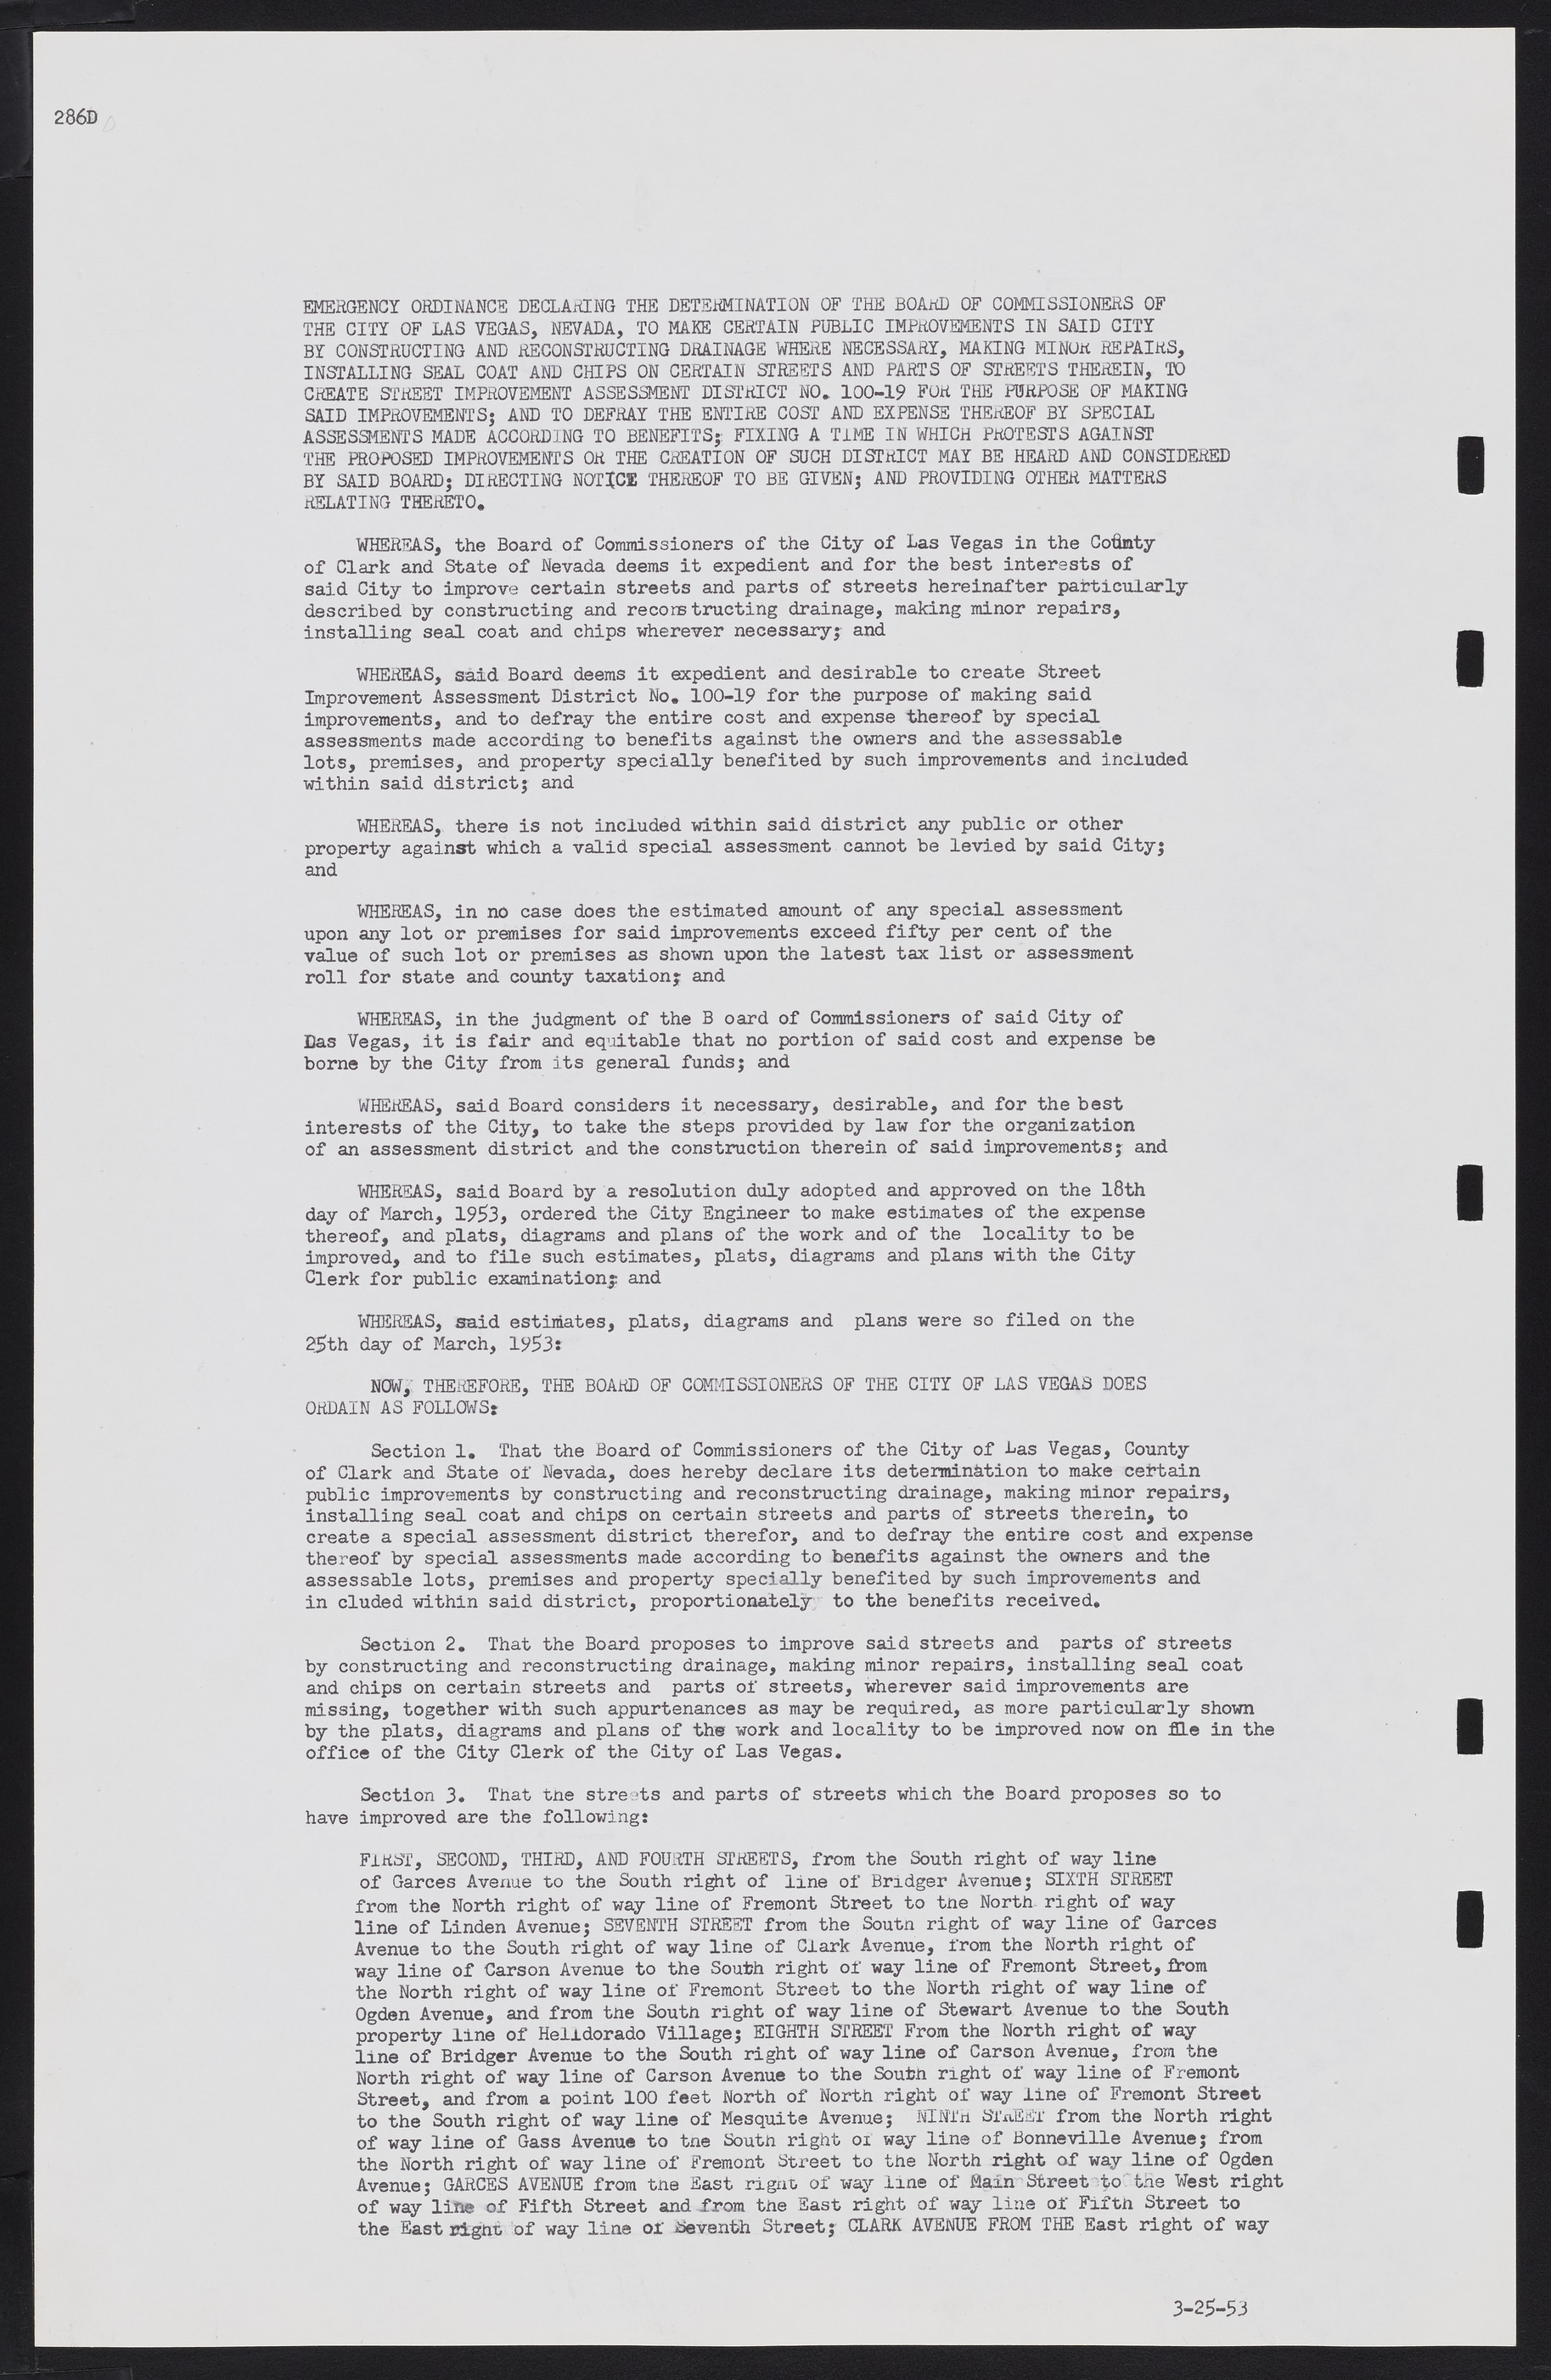 Las Vegas City Commission Minutes, May 26, 1952 to February 17, 1954, lvc000008-306